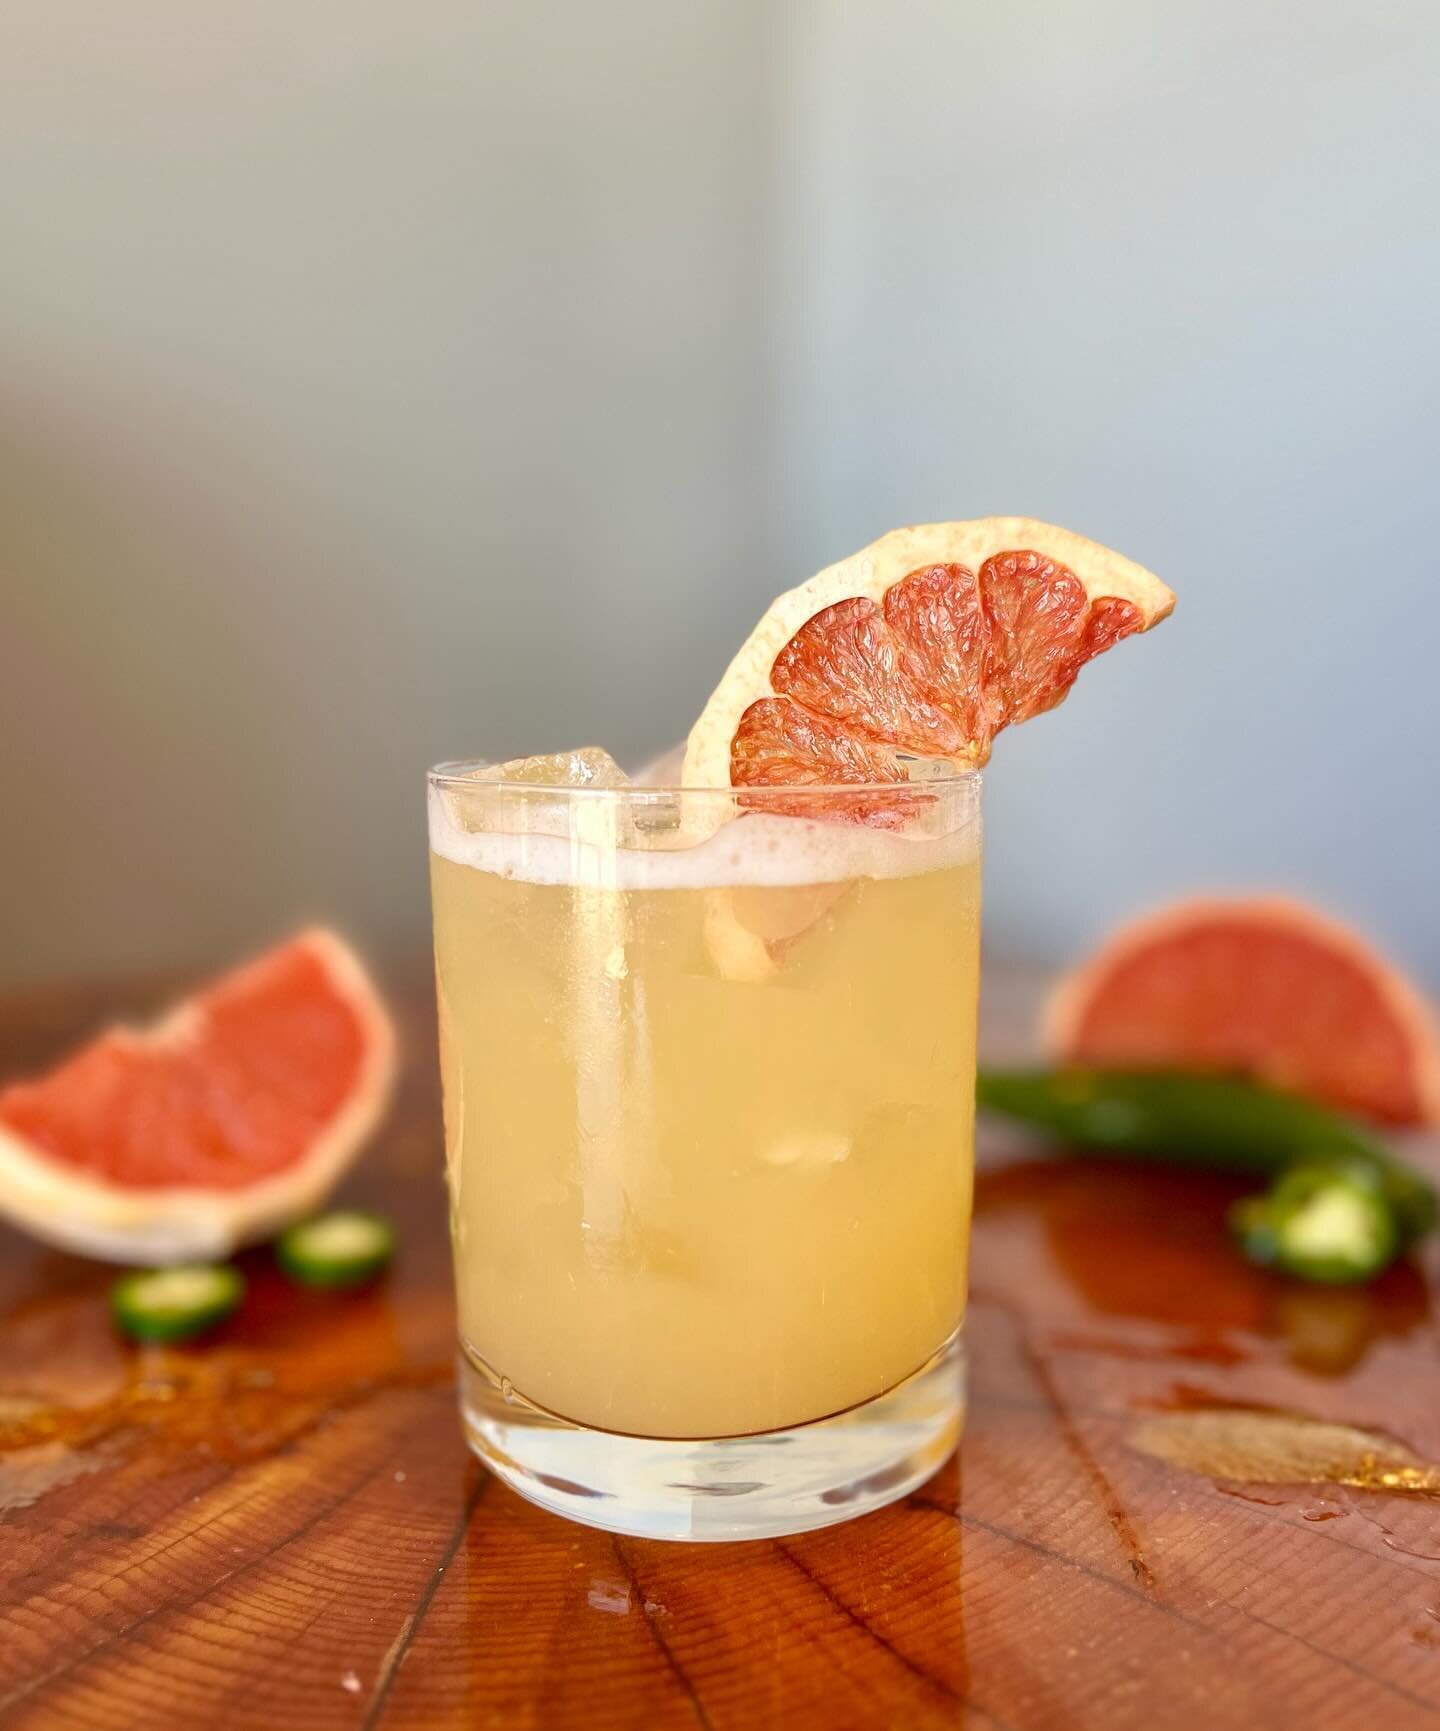 Heating things up with this week&rsquo;s featured cocktail, The Escape🌶️ It is perfectly balanced with subtle serrano spice, a touch of sweetness, and bright juicy flavors. Delish! 

🥃: Narrow Road Vodka &bull; Grapefruit-serrano syrup &bull; guava